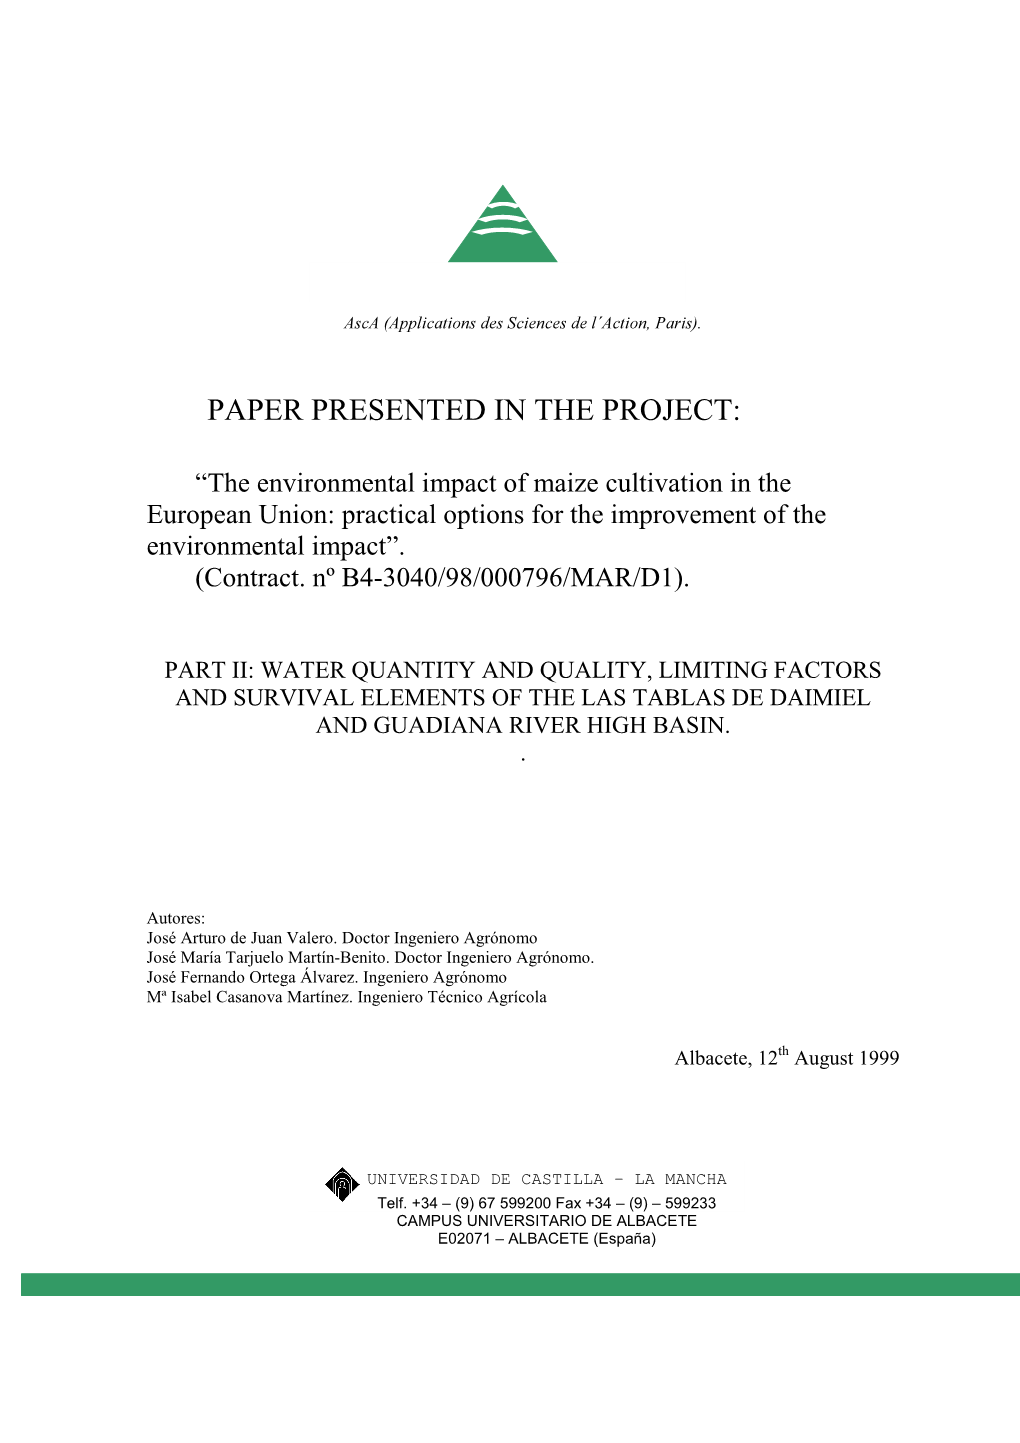 Paper Presented in the Project